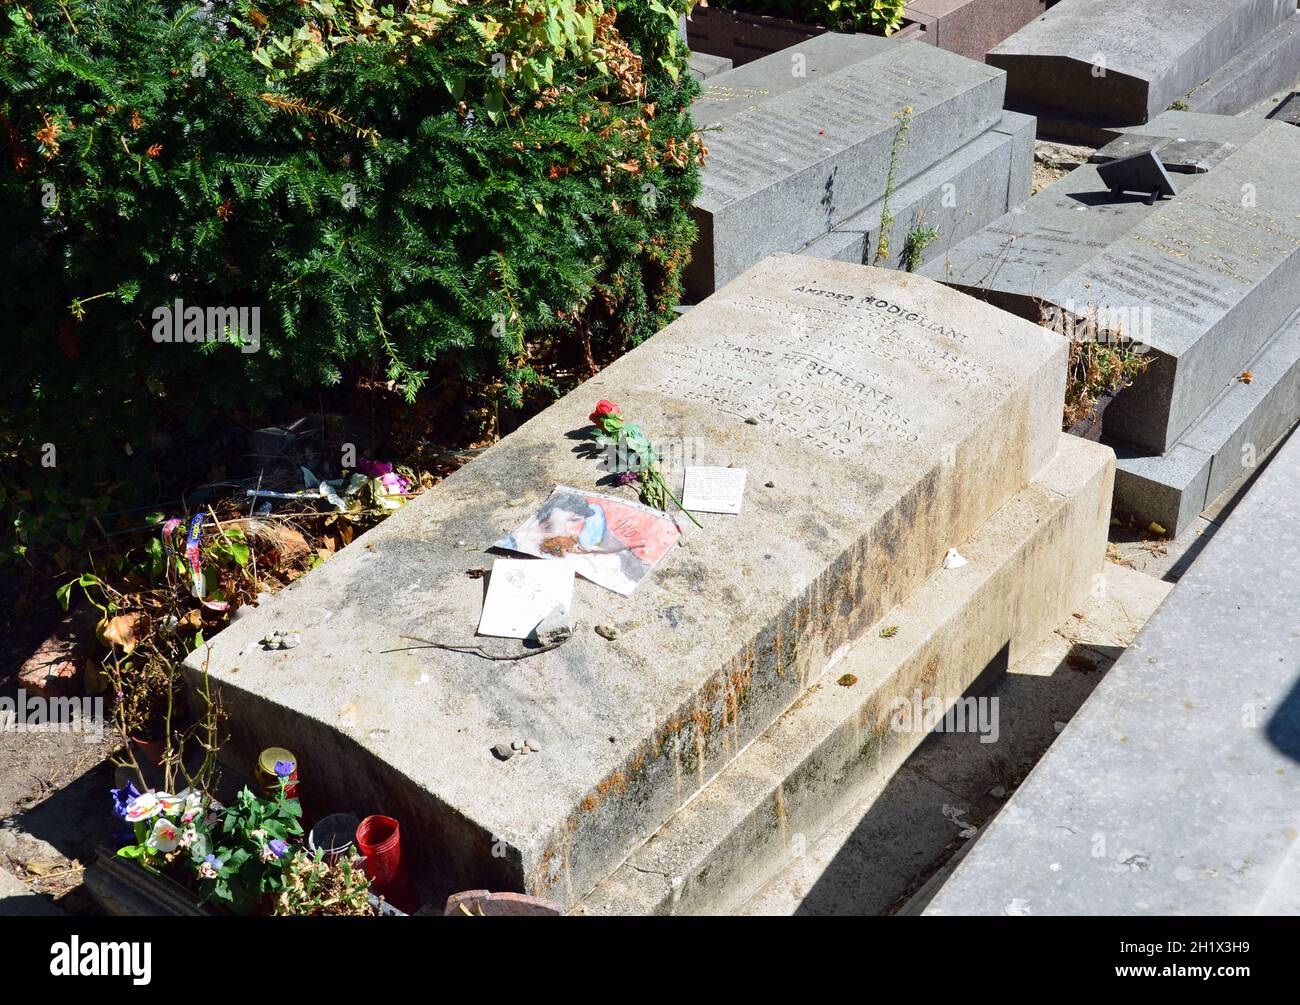 PARIS, FRANCE - SEPT 12, 2014: Amedeo Modigliani and Jeanne Hebuterne grave in Pere-Lachaise cemetery, Paris, France Stock Photo